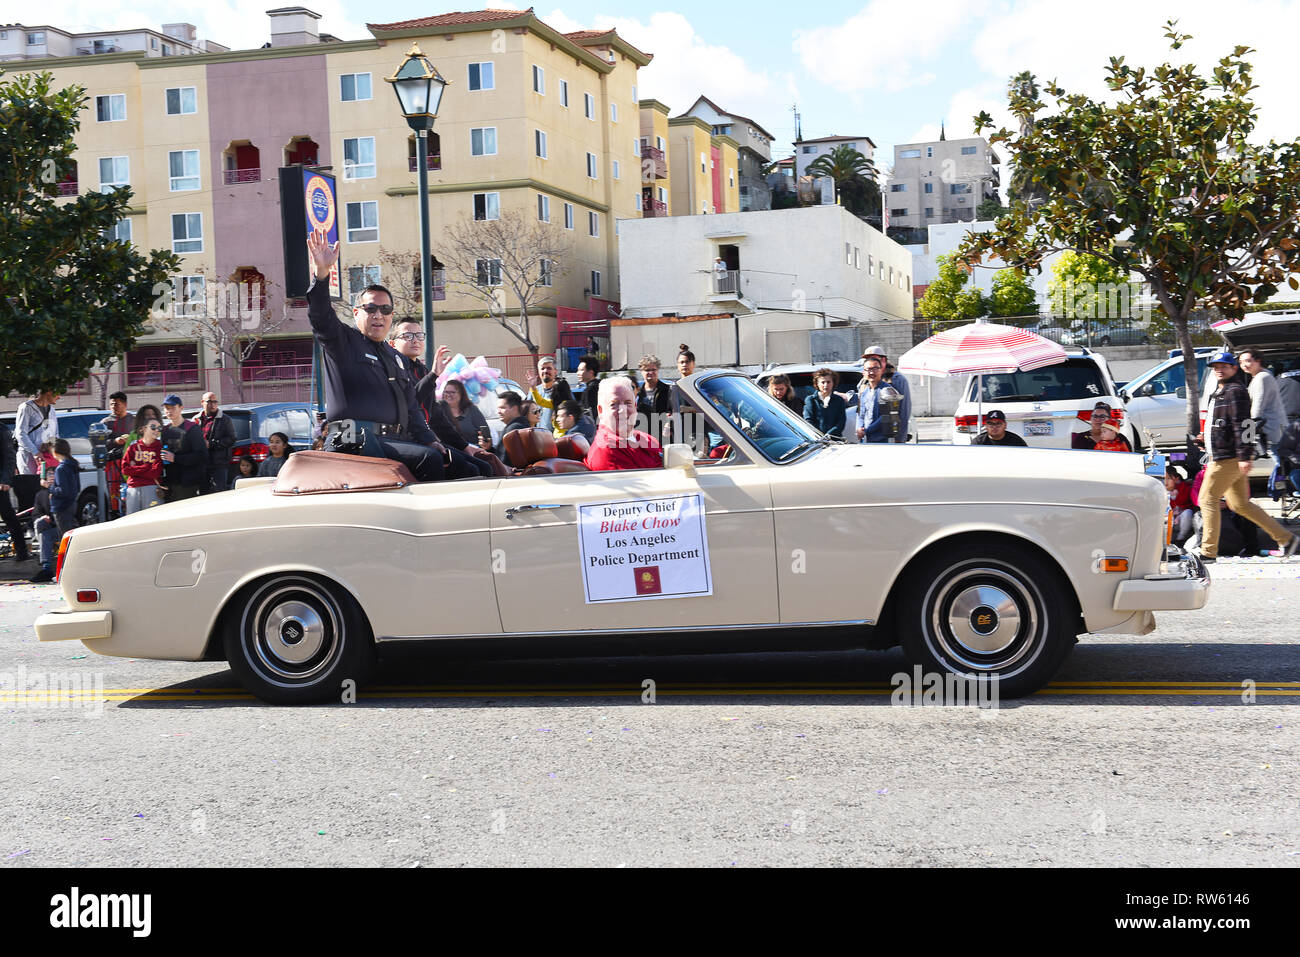 LOS ANGELES - FEBRUARY 9, 2019: LAPD Deputy Chief Blake Chow rides in the Chinese New Year Parade. Stock Photo